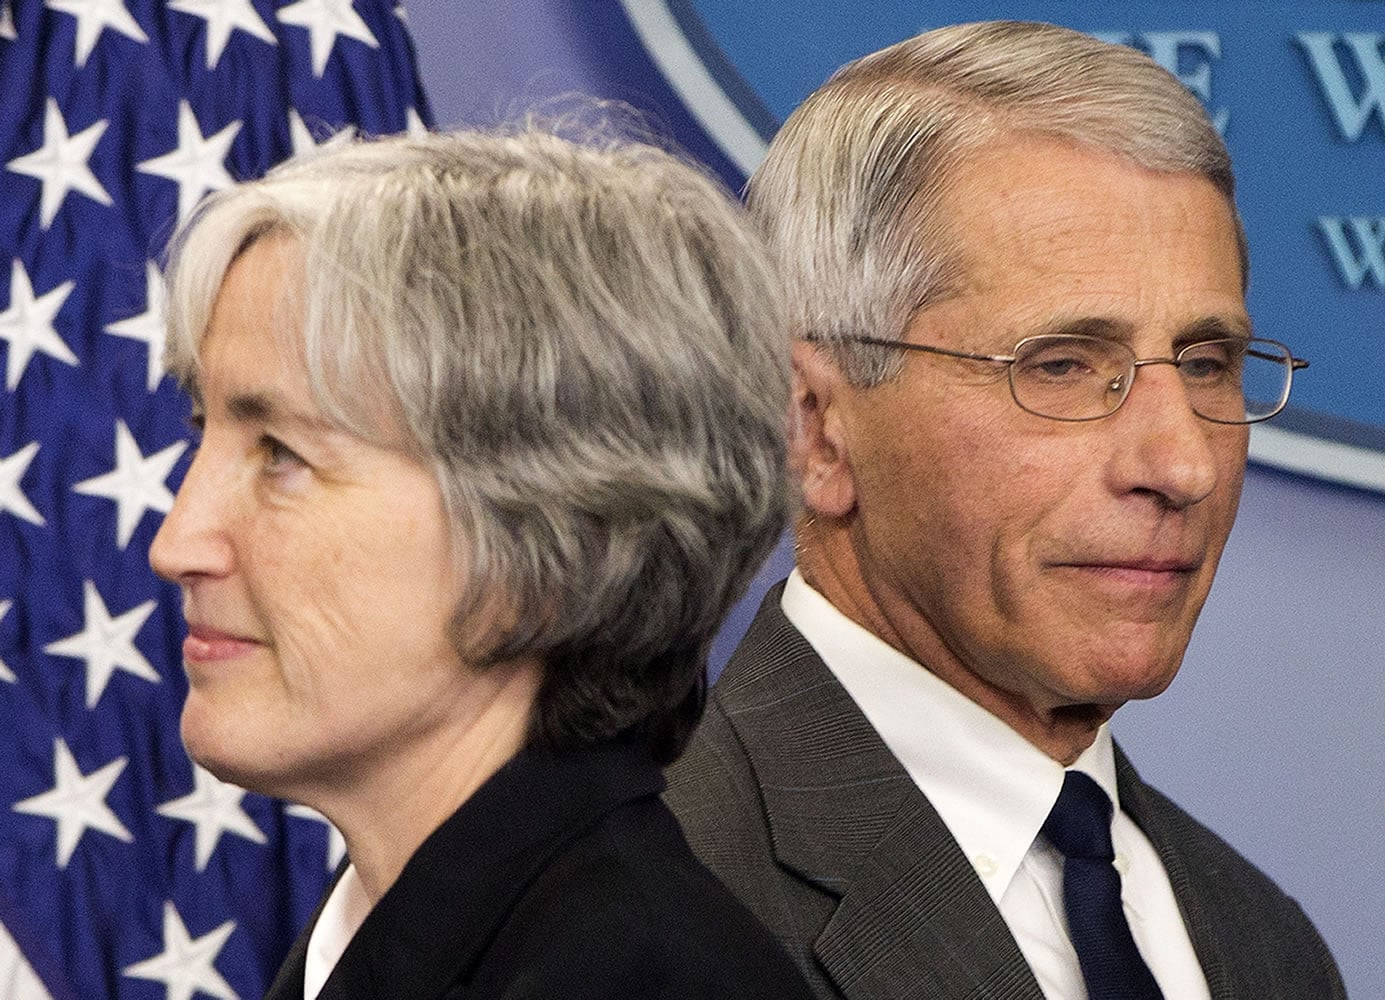 Dr. Anthony Fauci, director of NIH/NIAID, right, and Dr. Anne Schuchat, principal deputy director of the CDC, participate in a press briefing Monday at the White House in Washington.